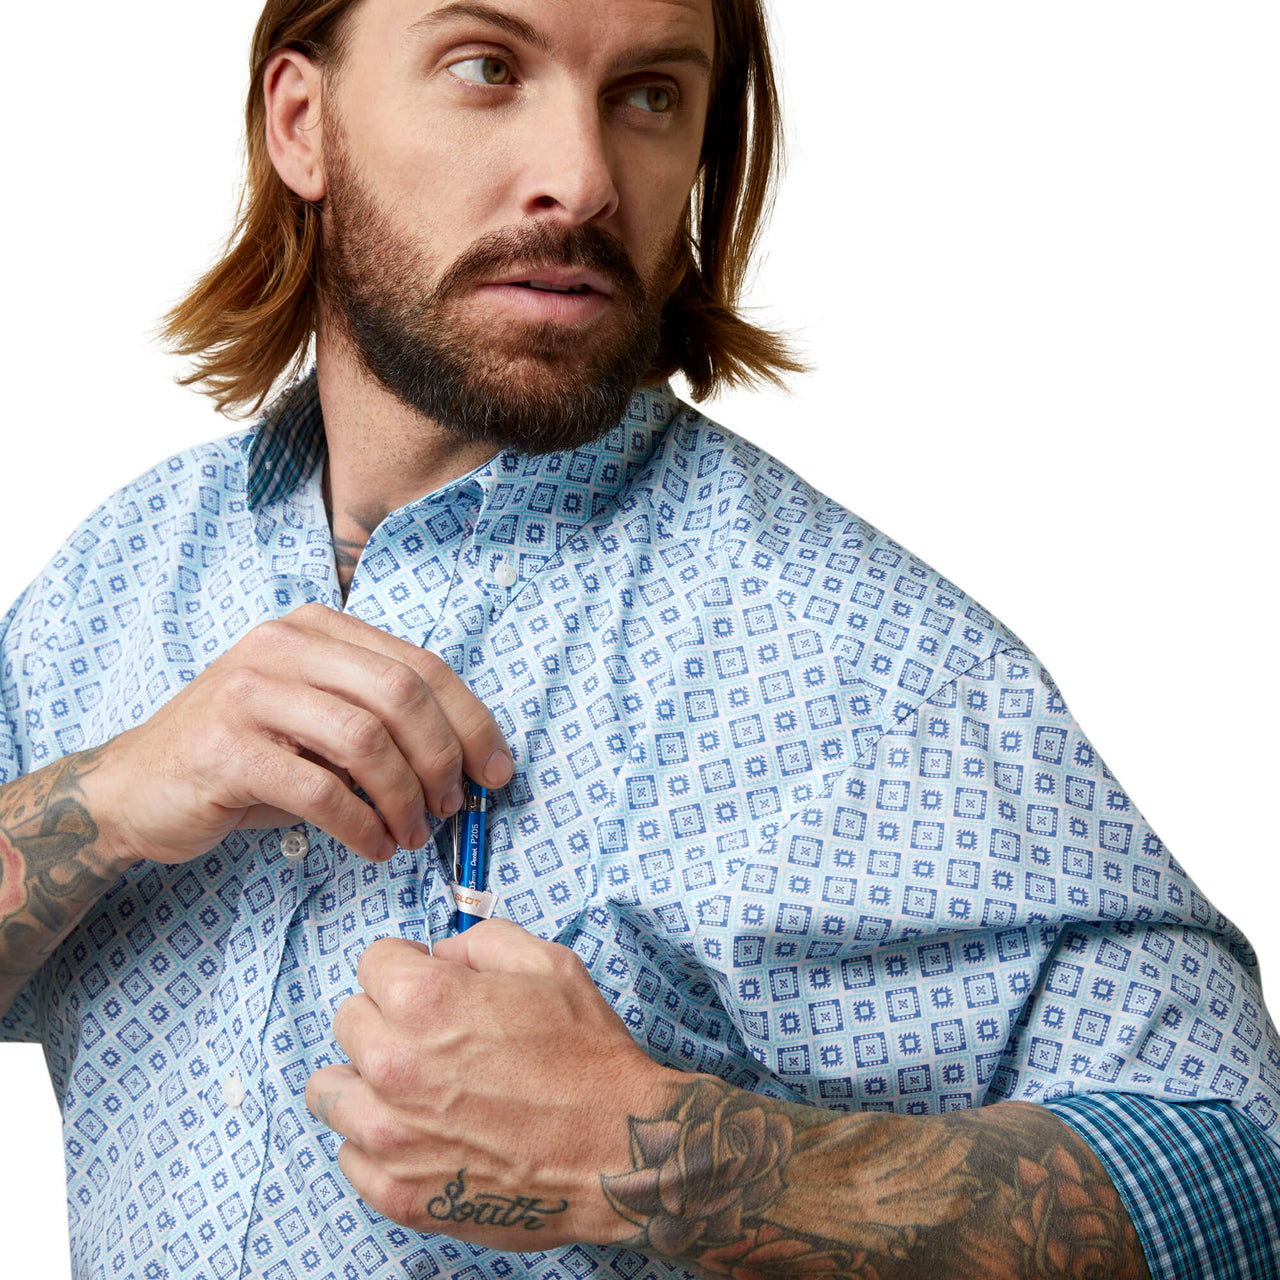 Wrinkle Free Wayne Classic Fit LS Button Down Shirt